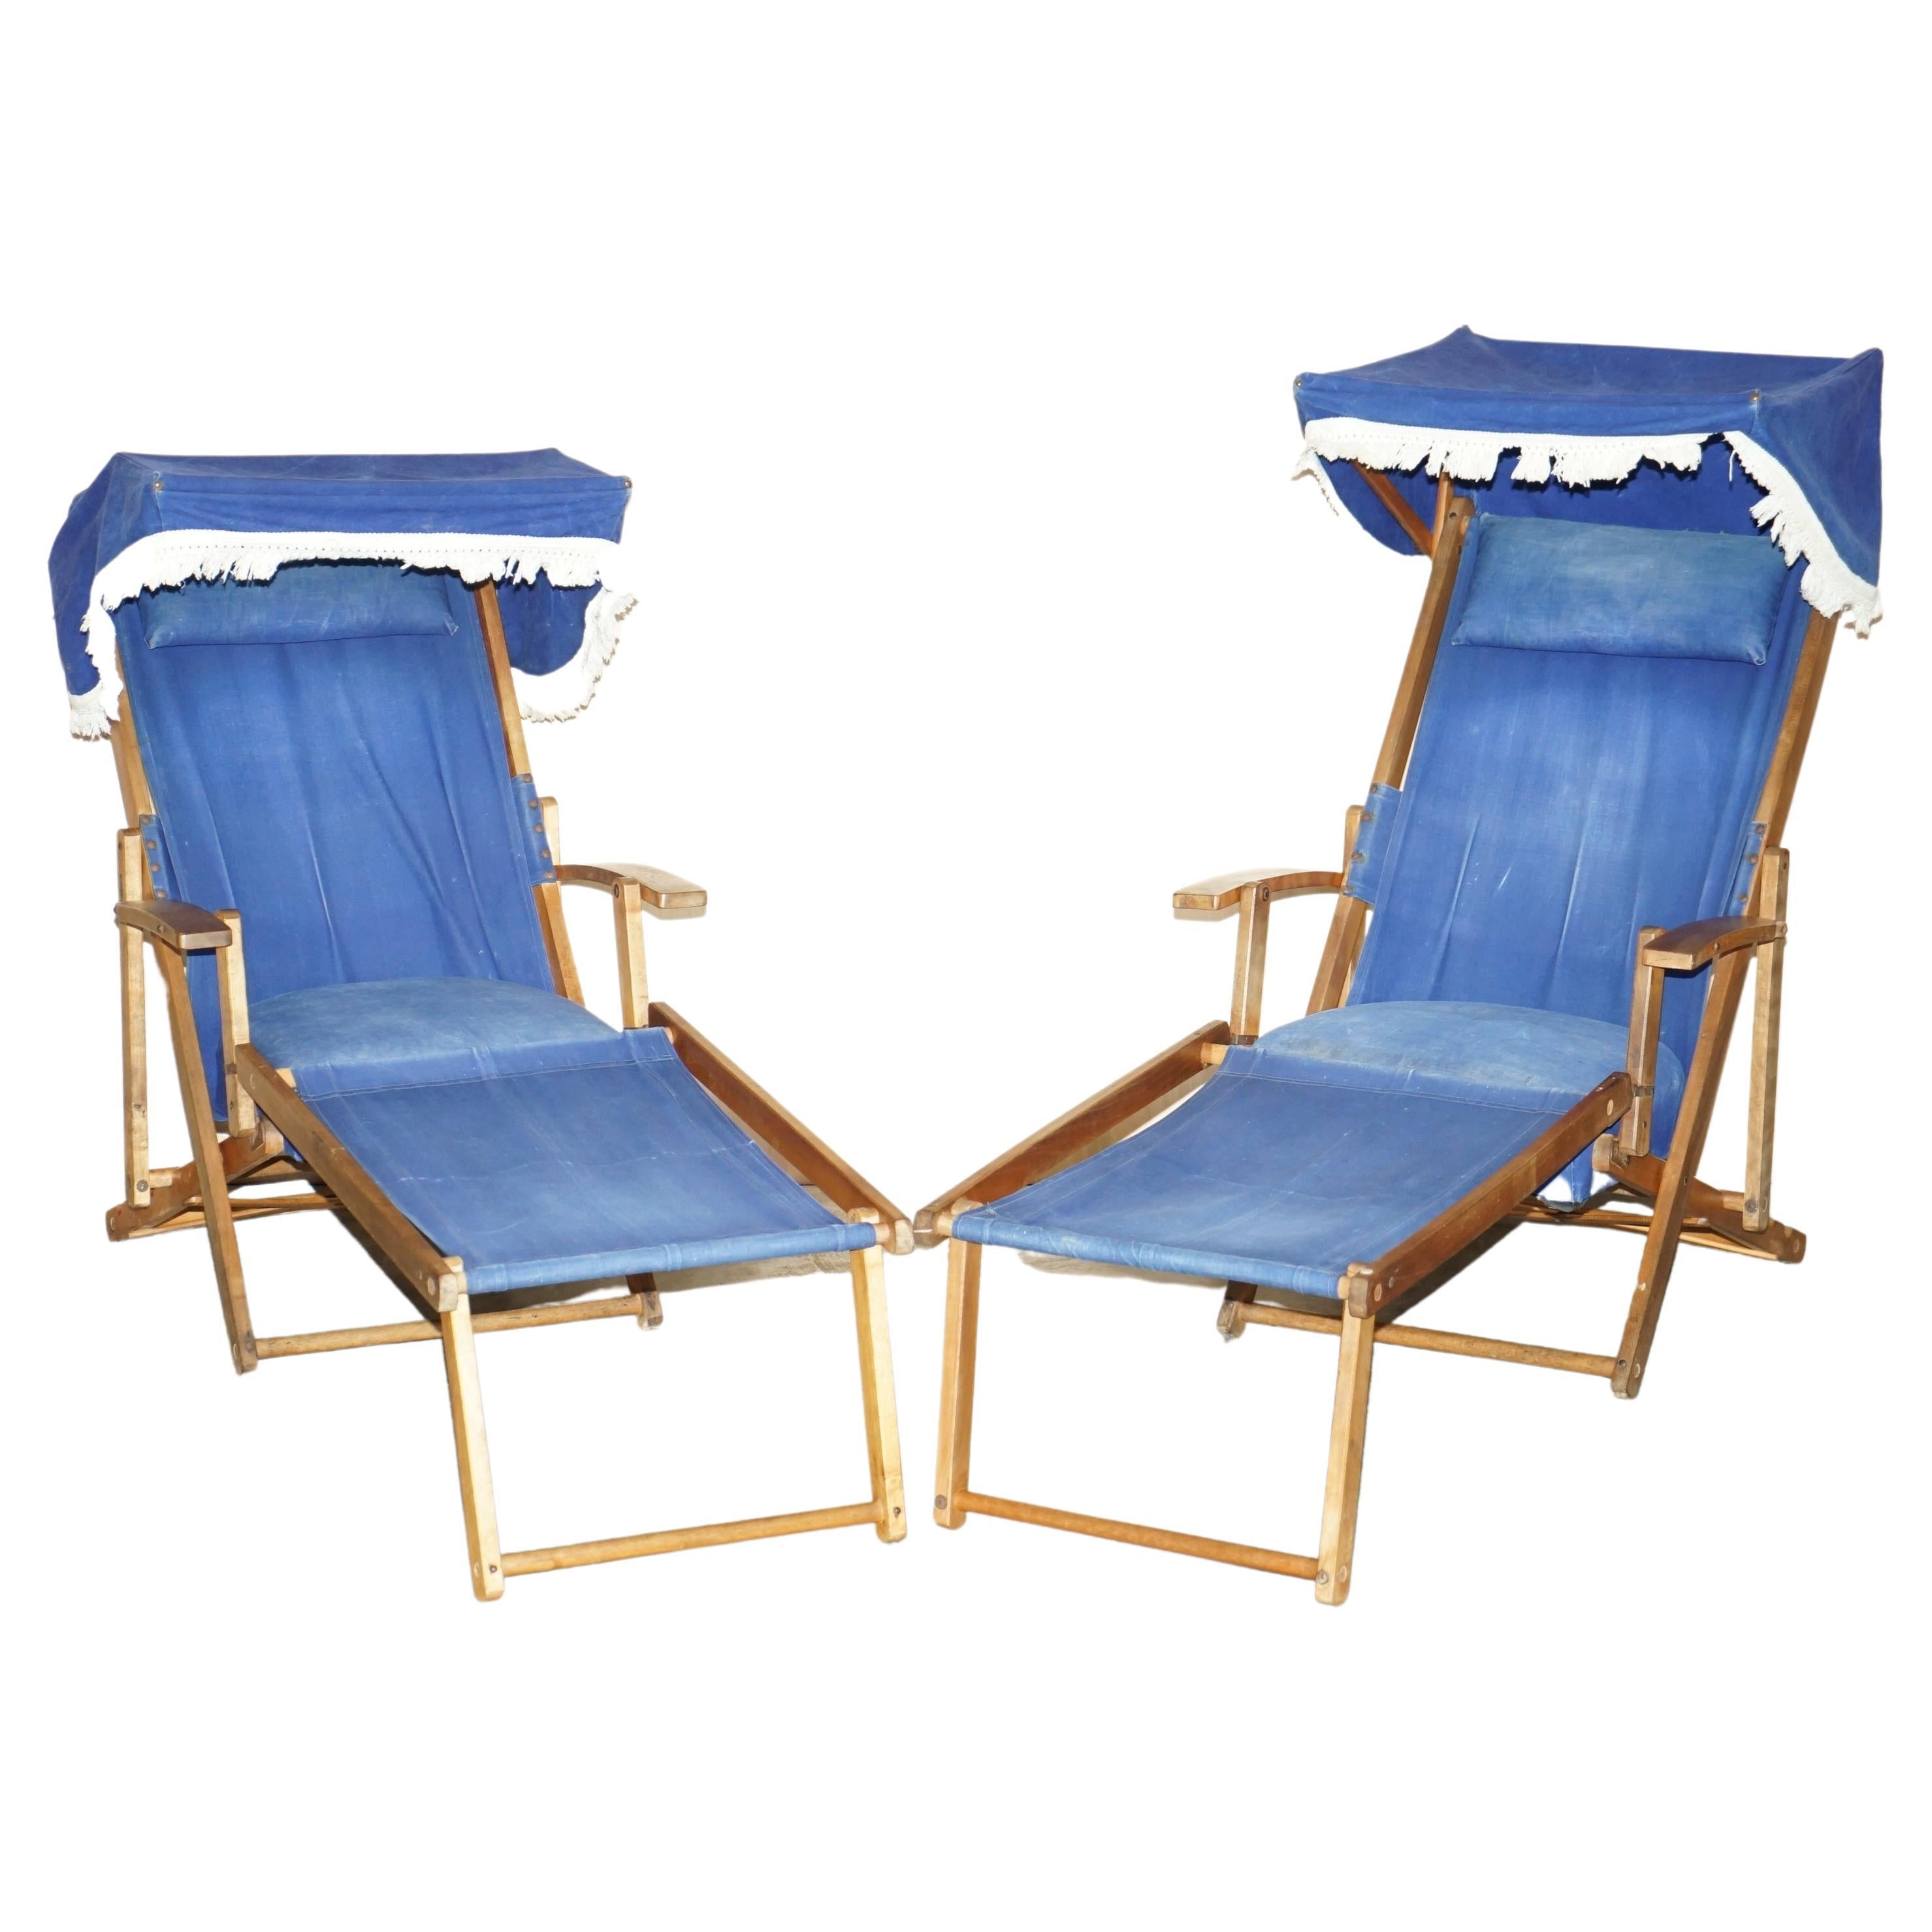 Pair of Antique circa 1900 Haxyes Steamer Deck Chairs Canopy Top & Footrests For Sale